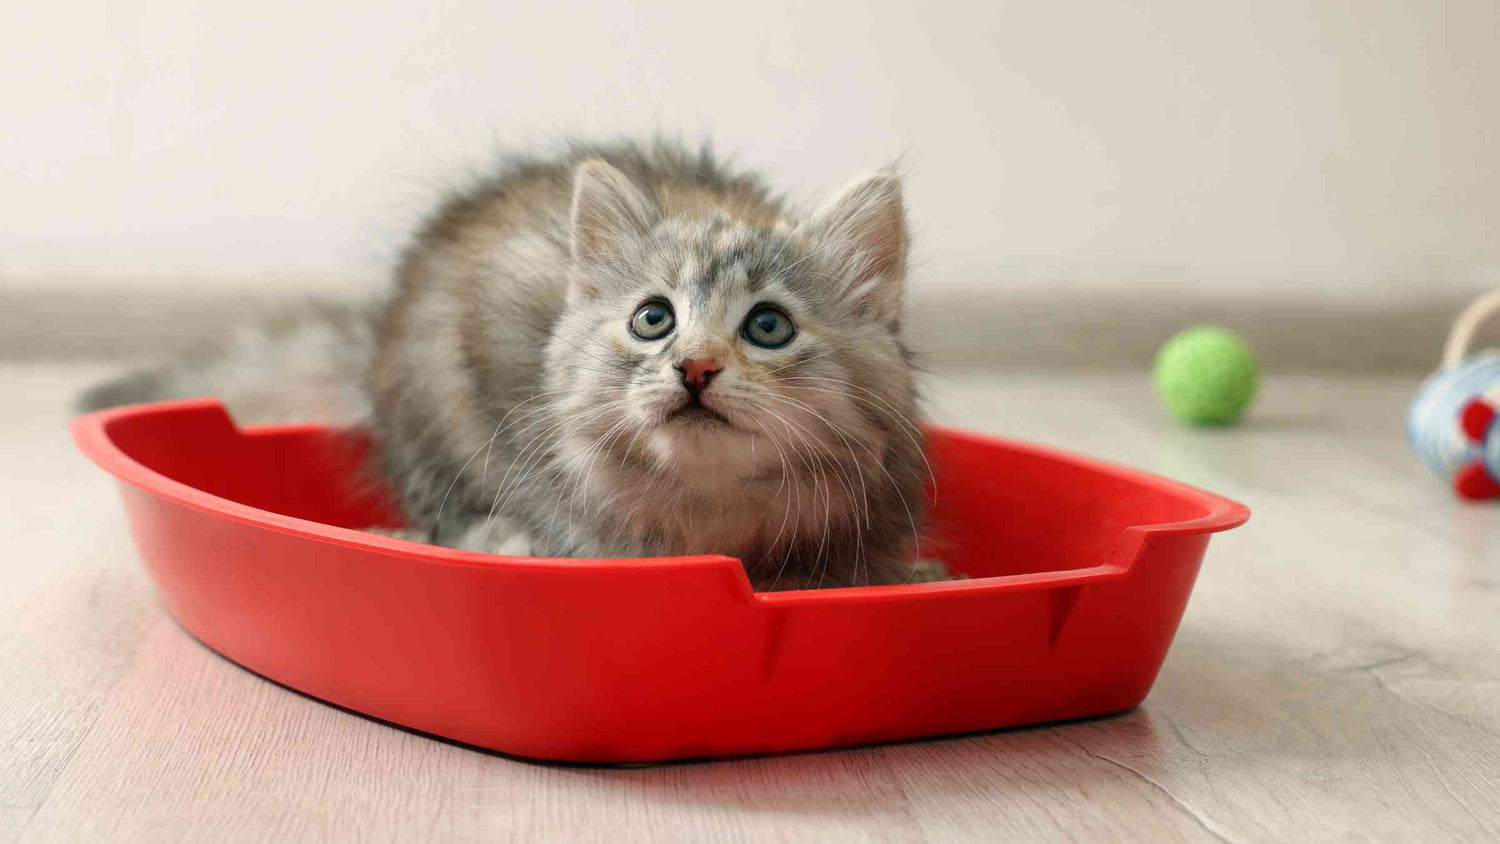 Why Do Cats Sit, Sleep, or Play in the Litter Box?